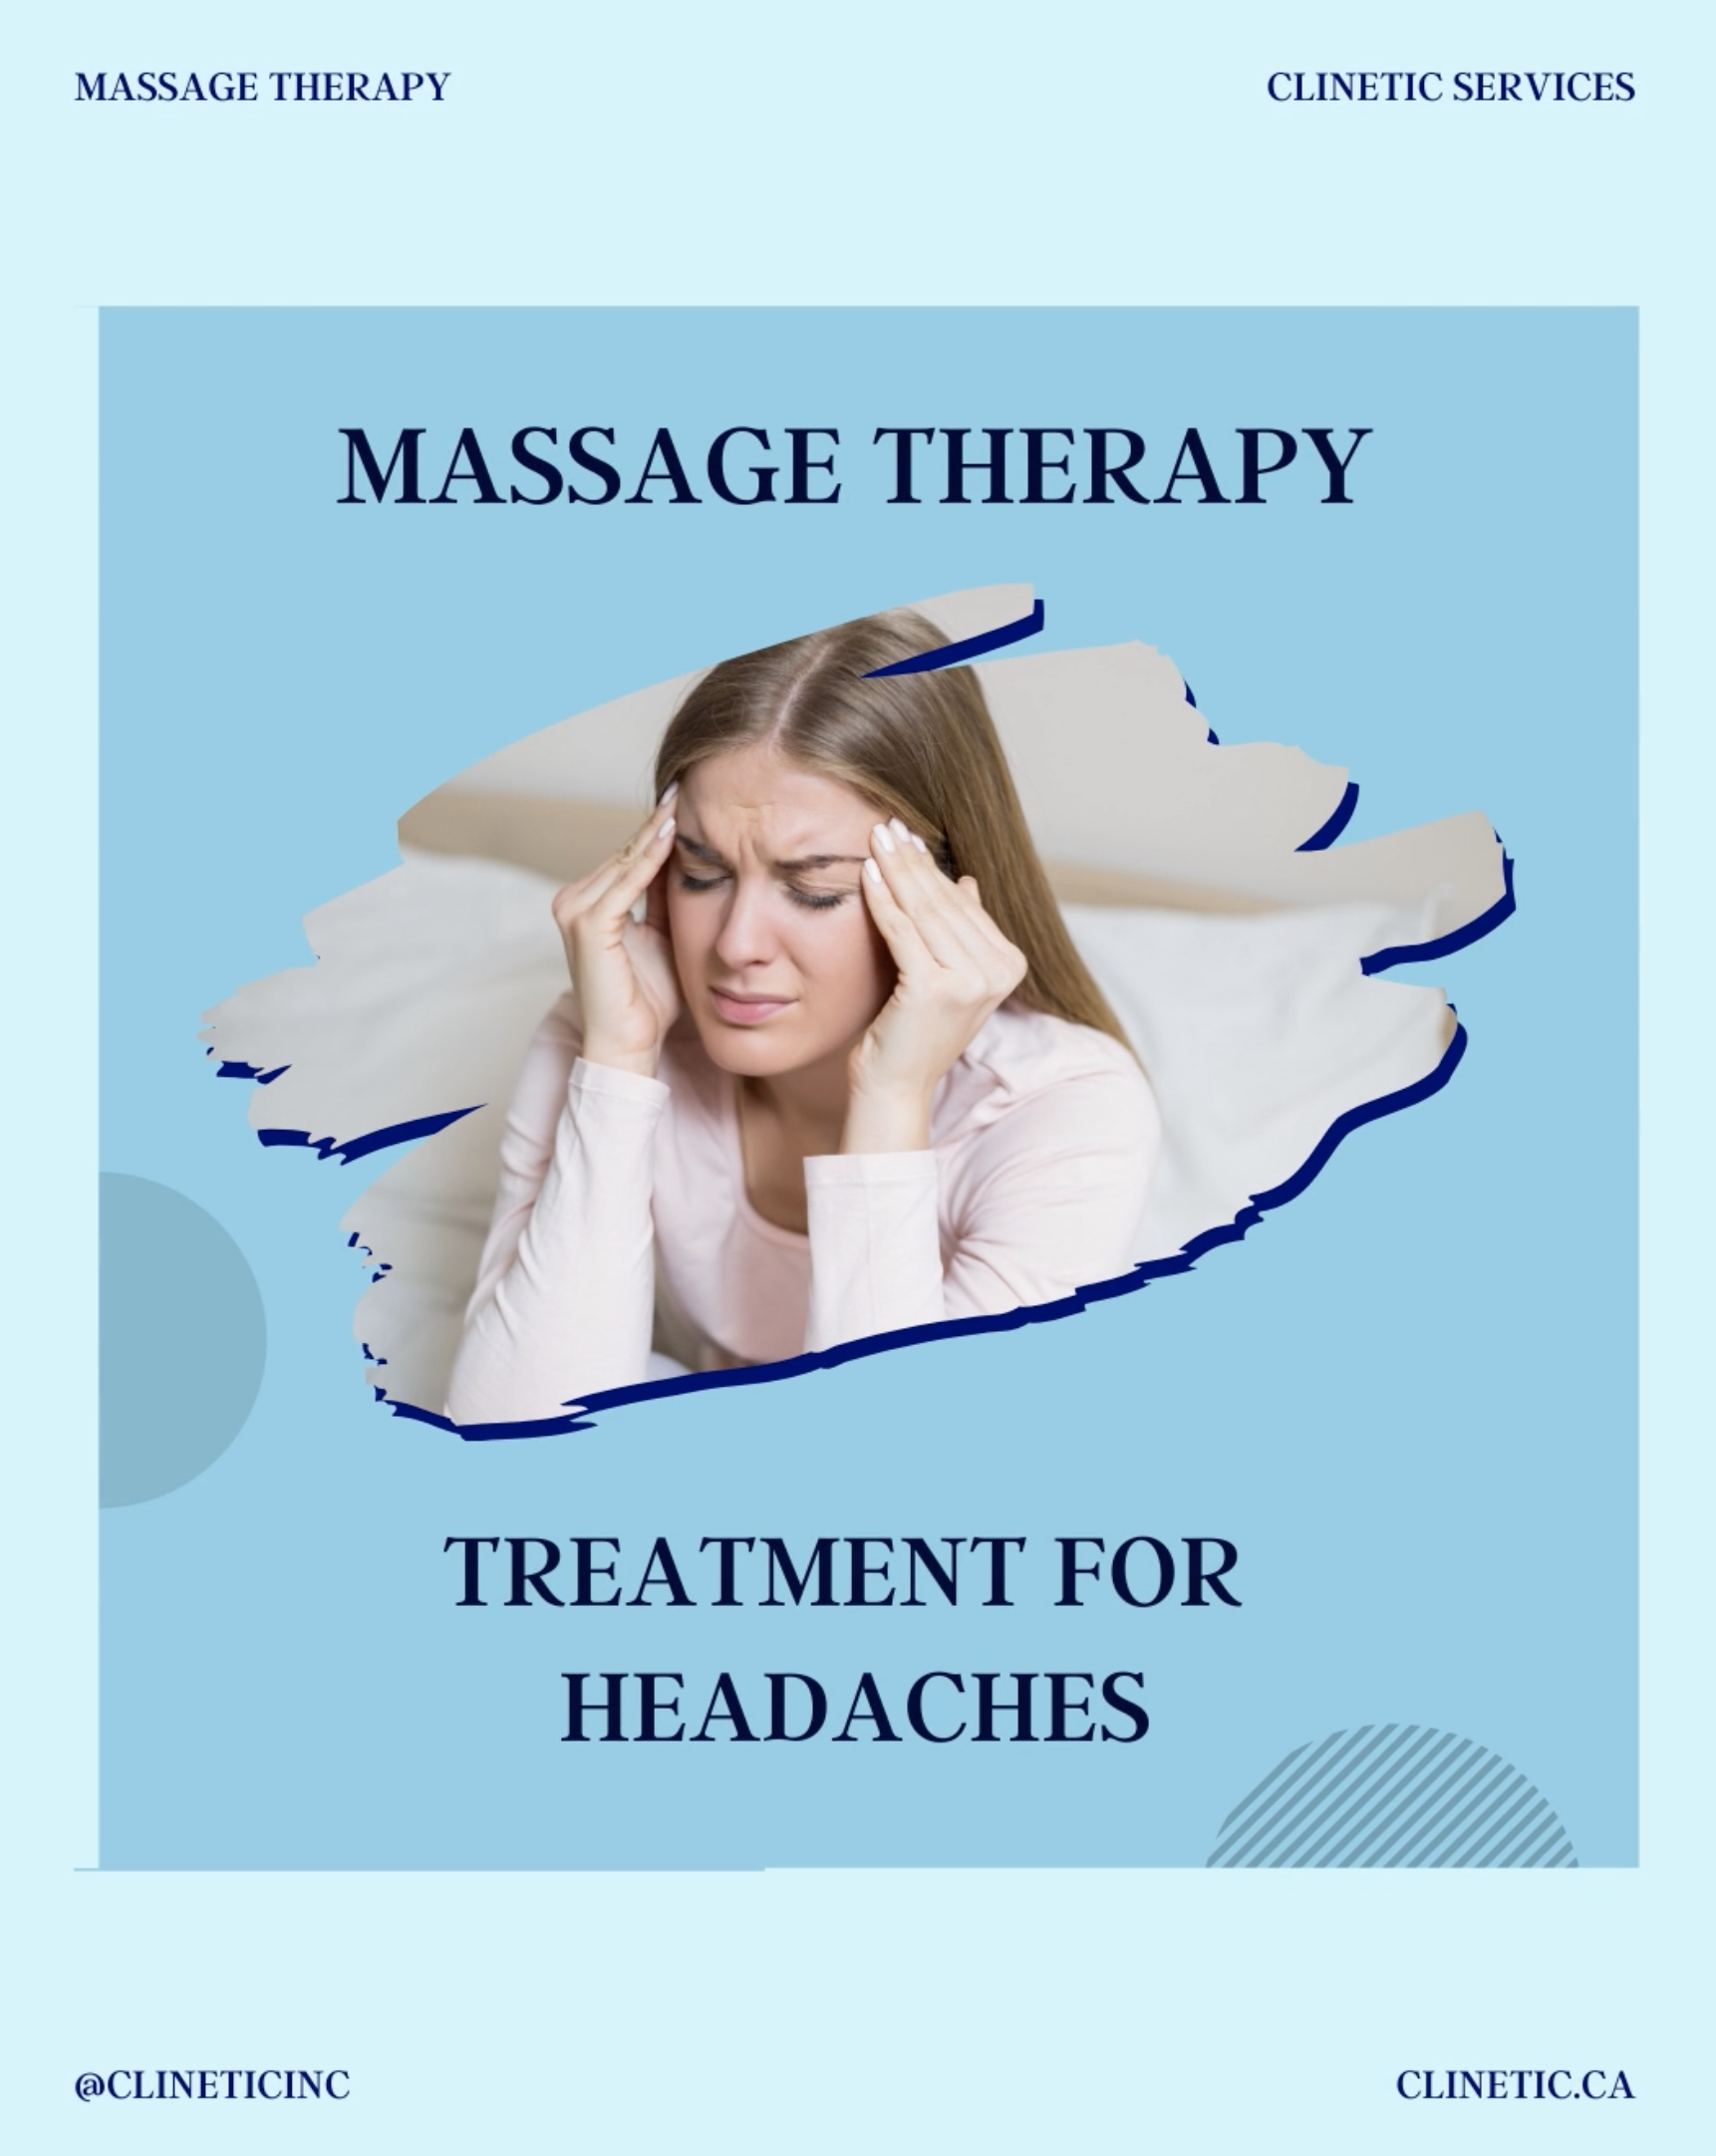 Massage therapy treatment for headaches